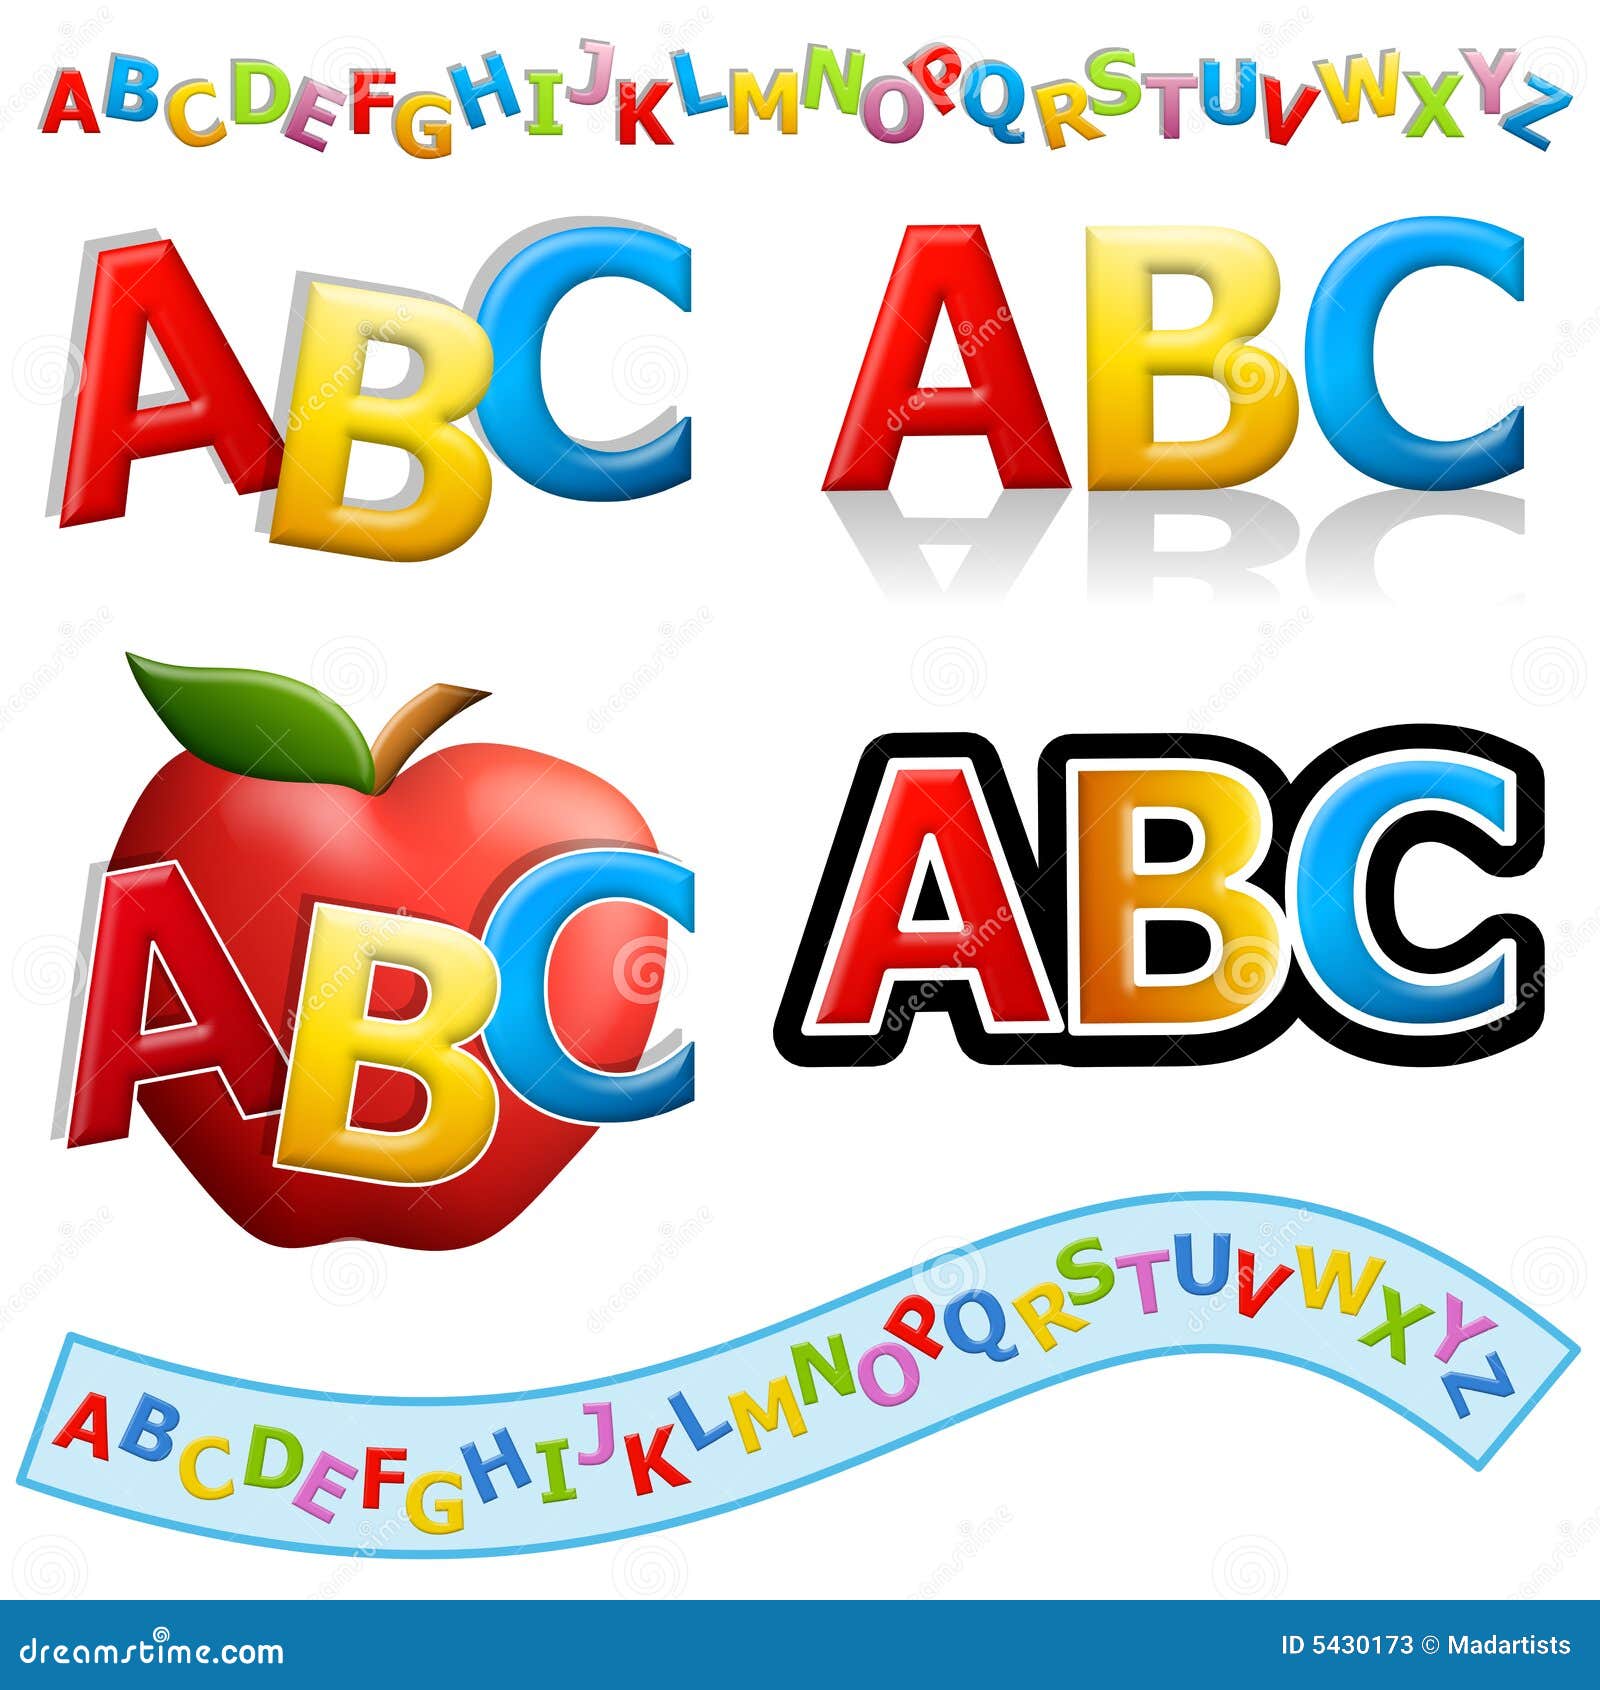 abc banners and logos